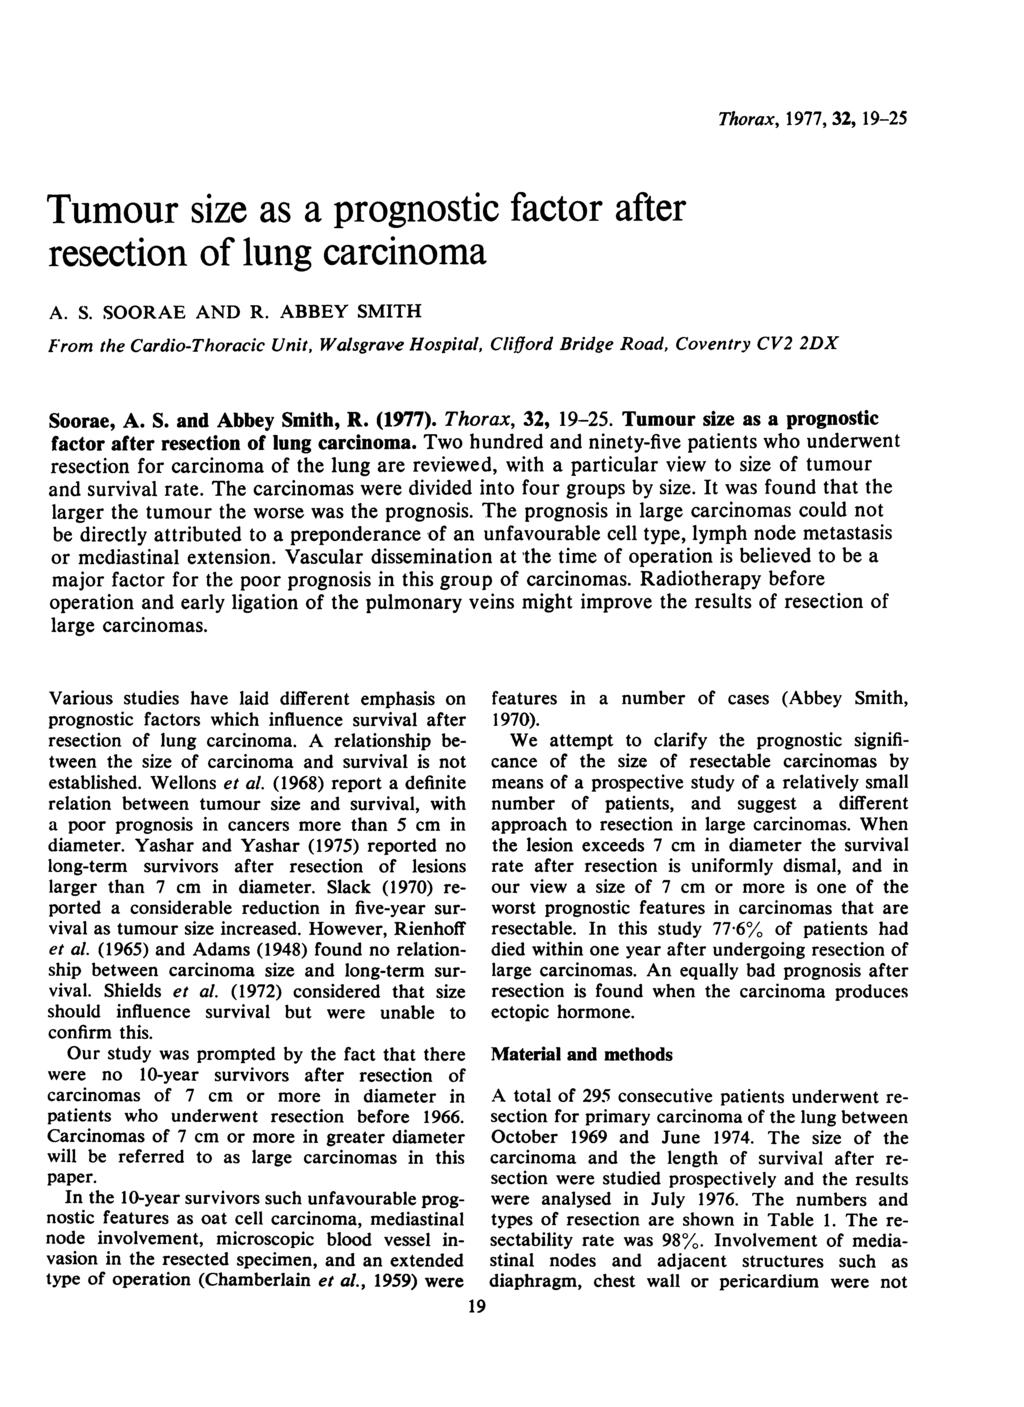 Tumour size as a prognostic factor after resection of lung carcinoma A. S. SOORAE AND R.